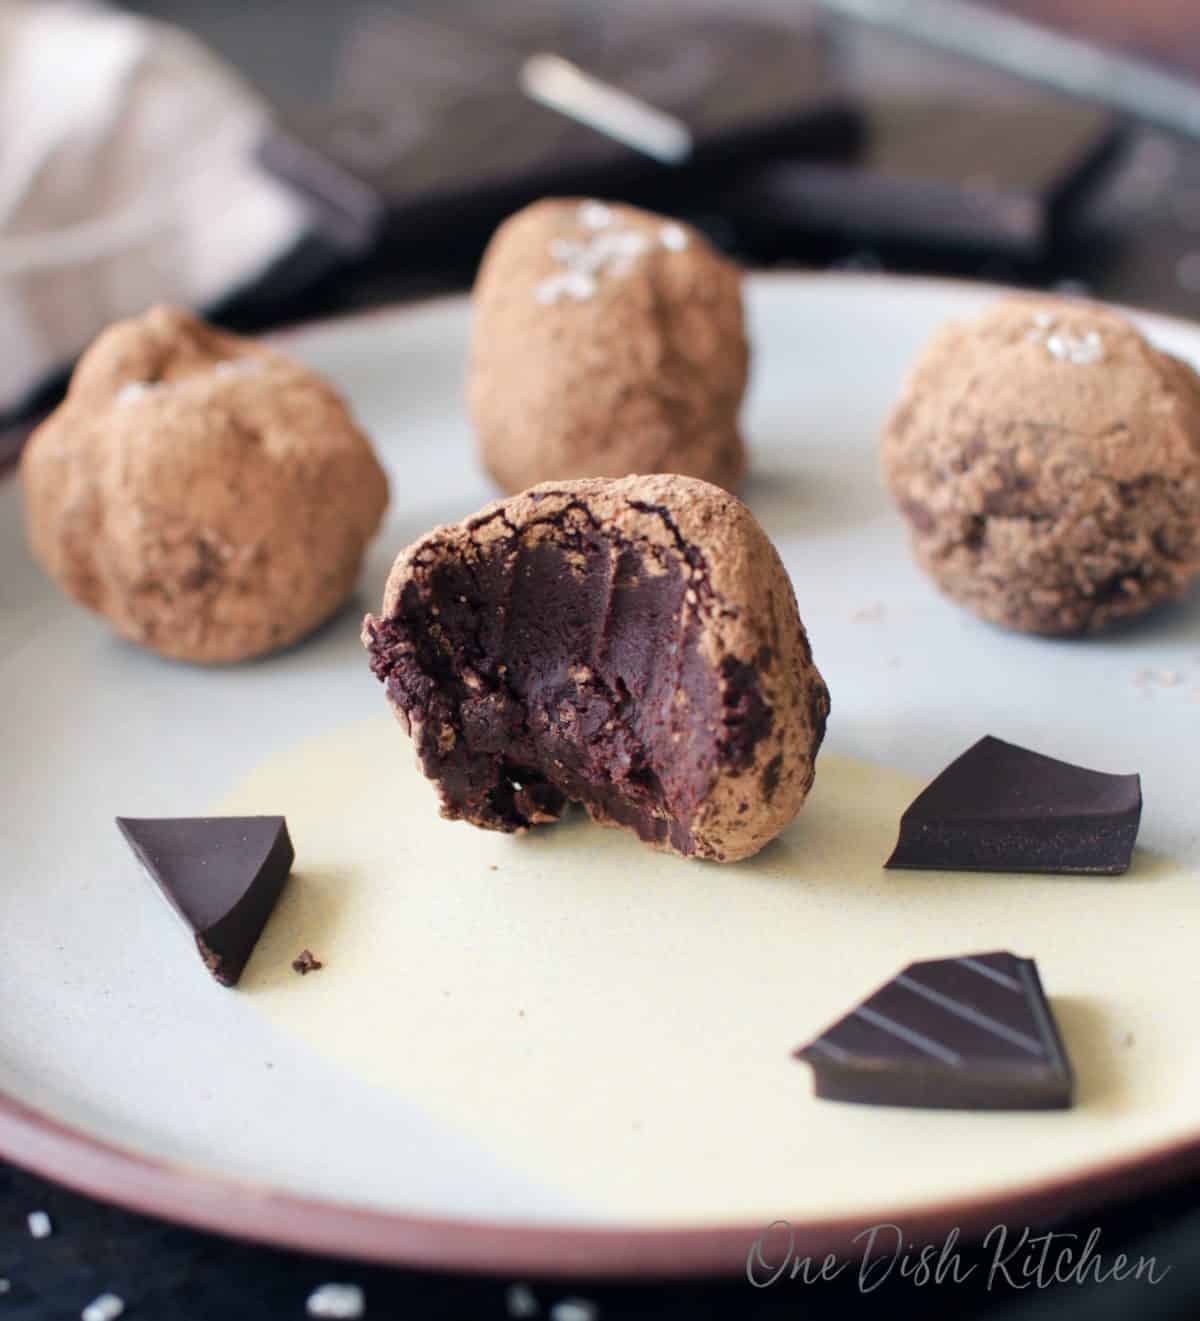 Four chocolate truffles coated in cocoa powder and one has a bite taken from it all on a plate